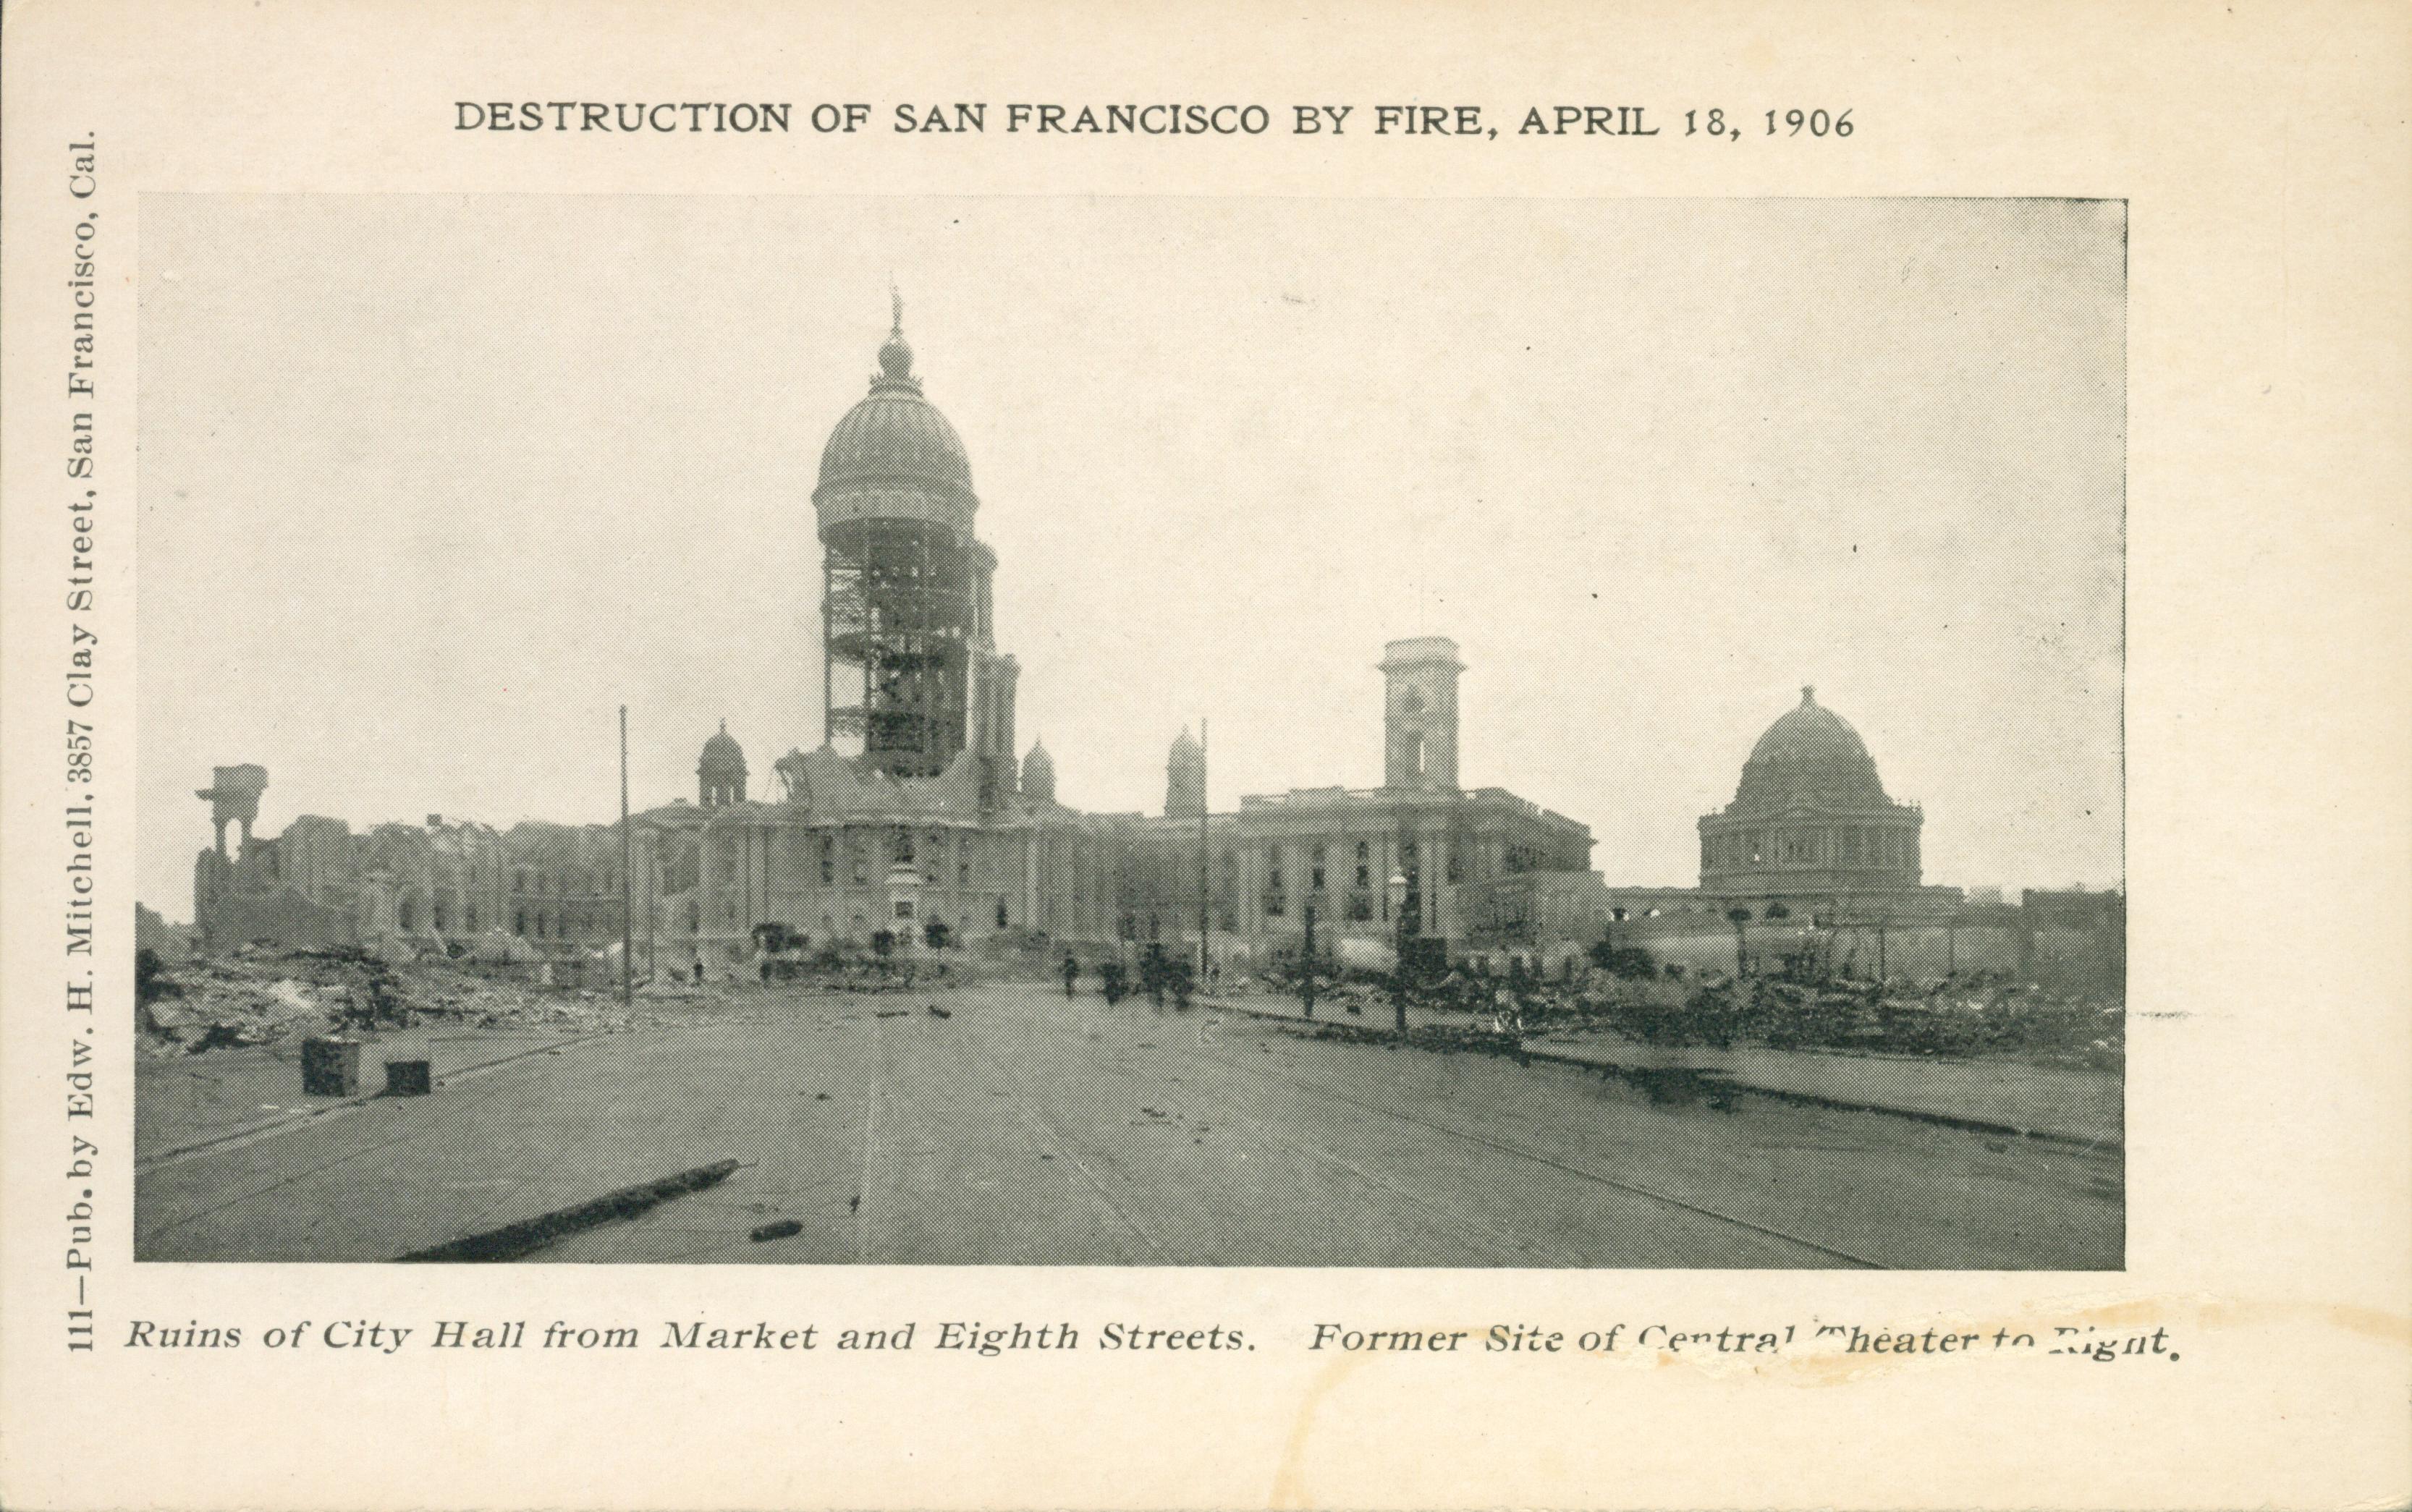 Photo of the destruction of City Hall.